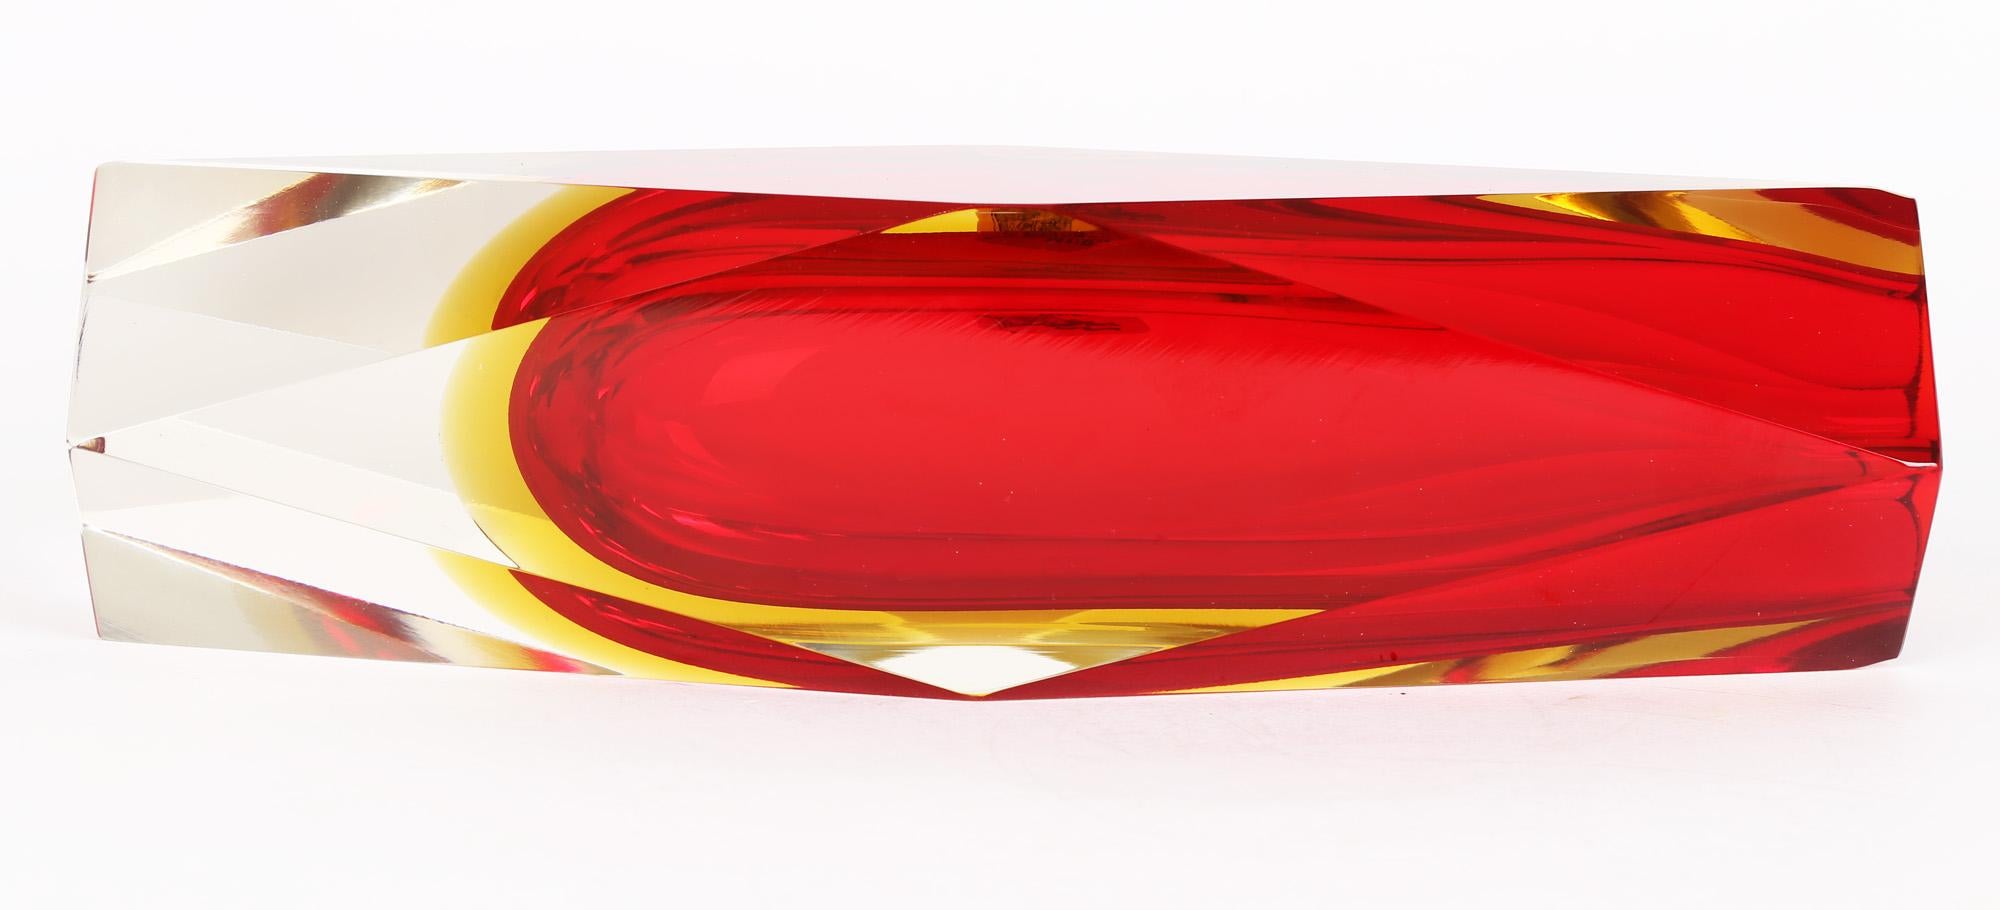 Hand-Crafted Pagnin & Bon Italian Murano Red and Yellow Sommerso Facet Cut Glass Vase For Sale